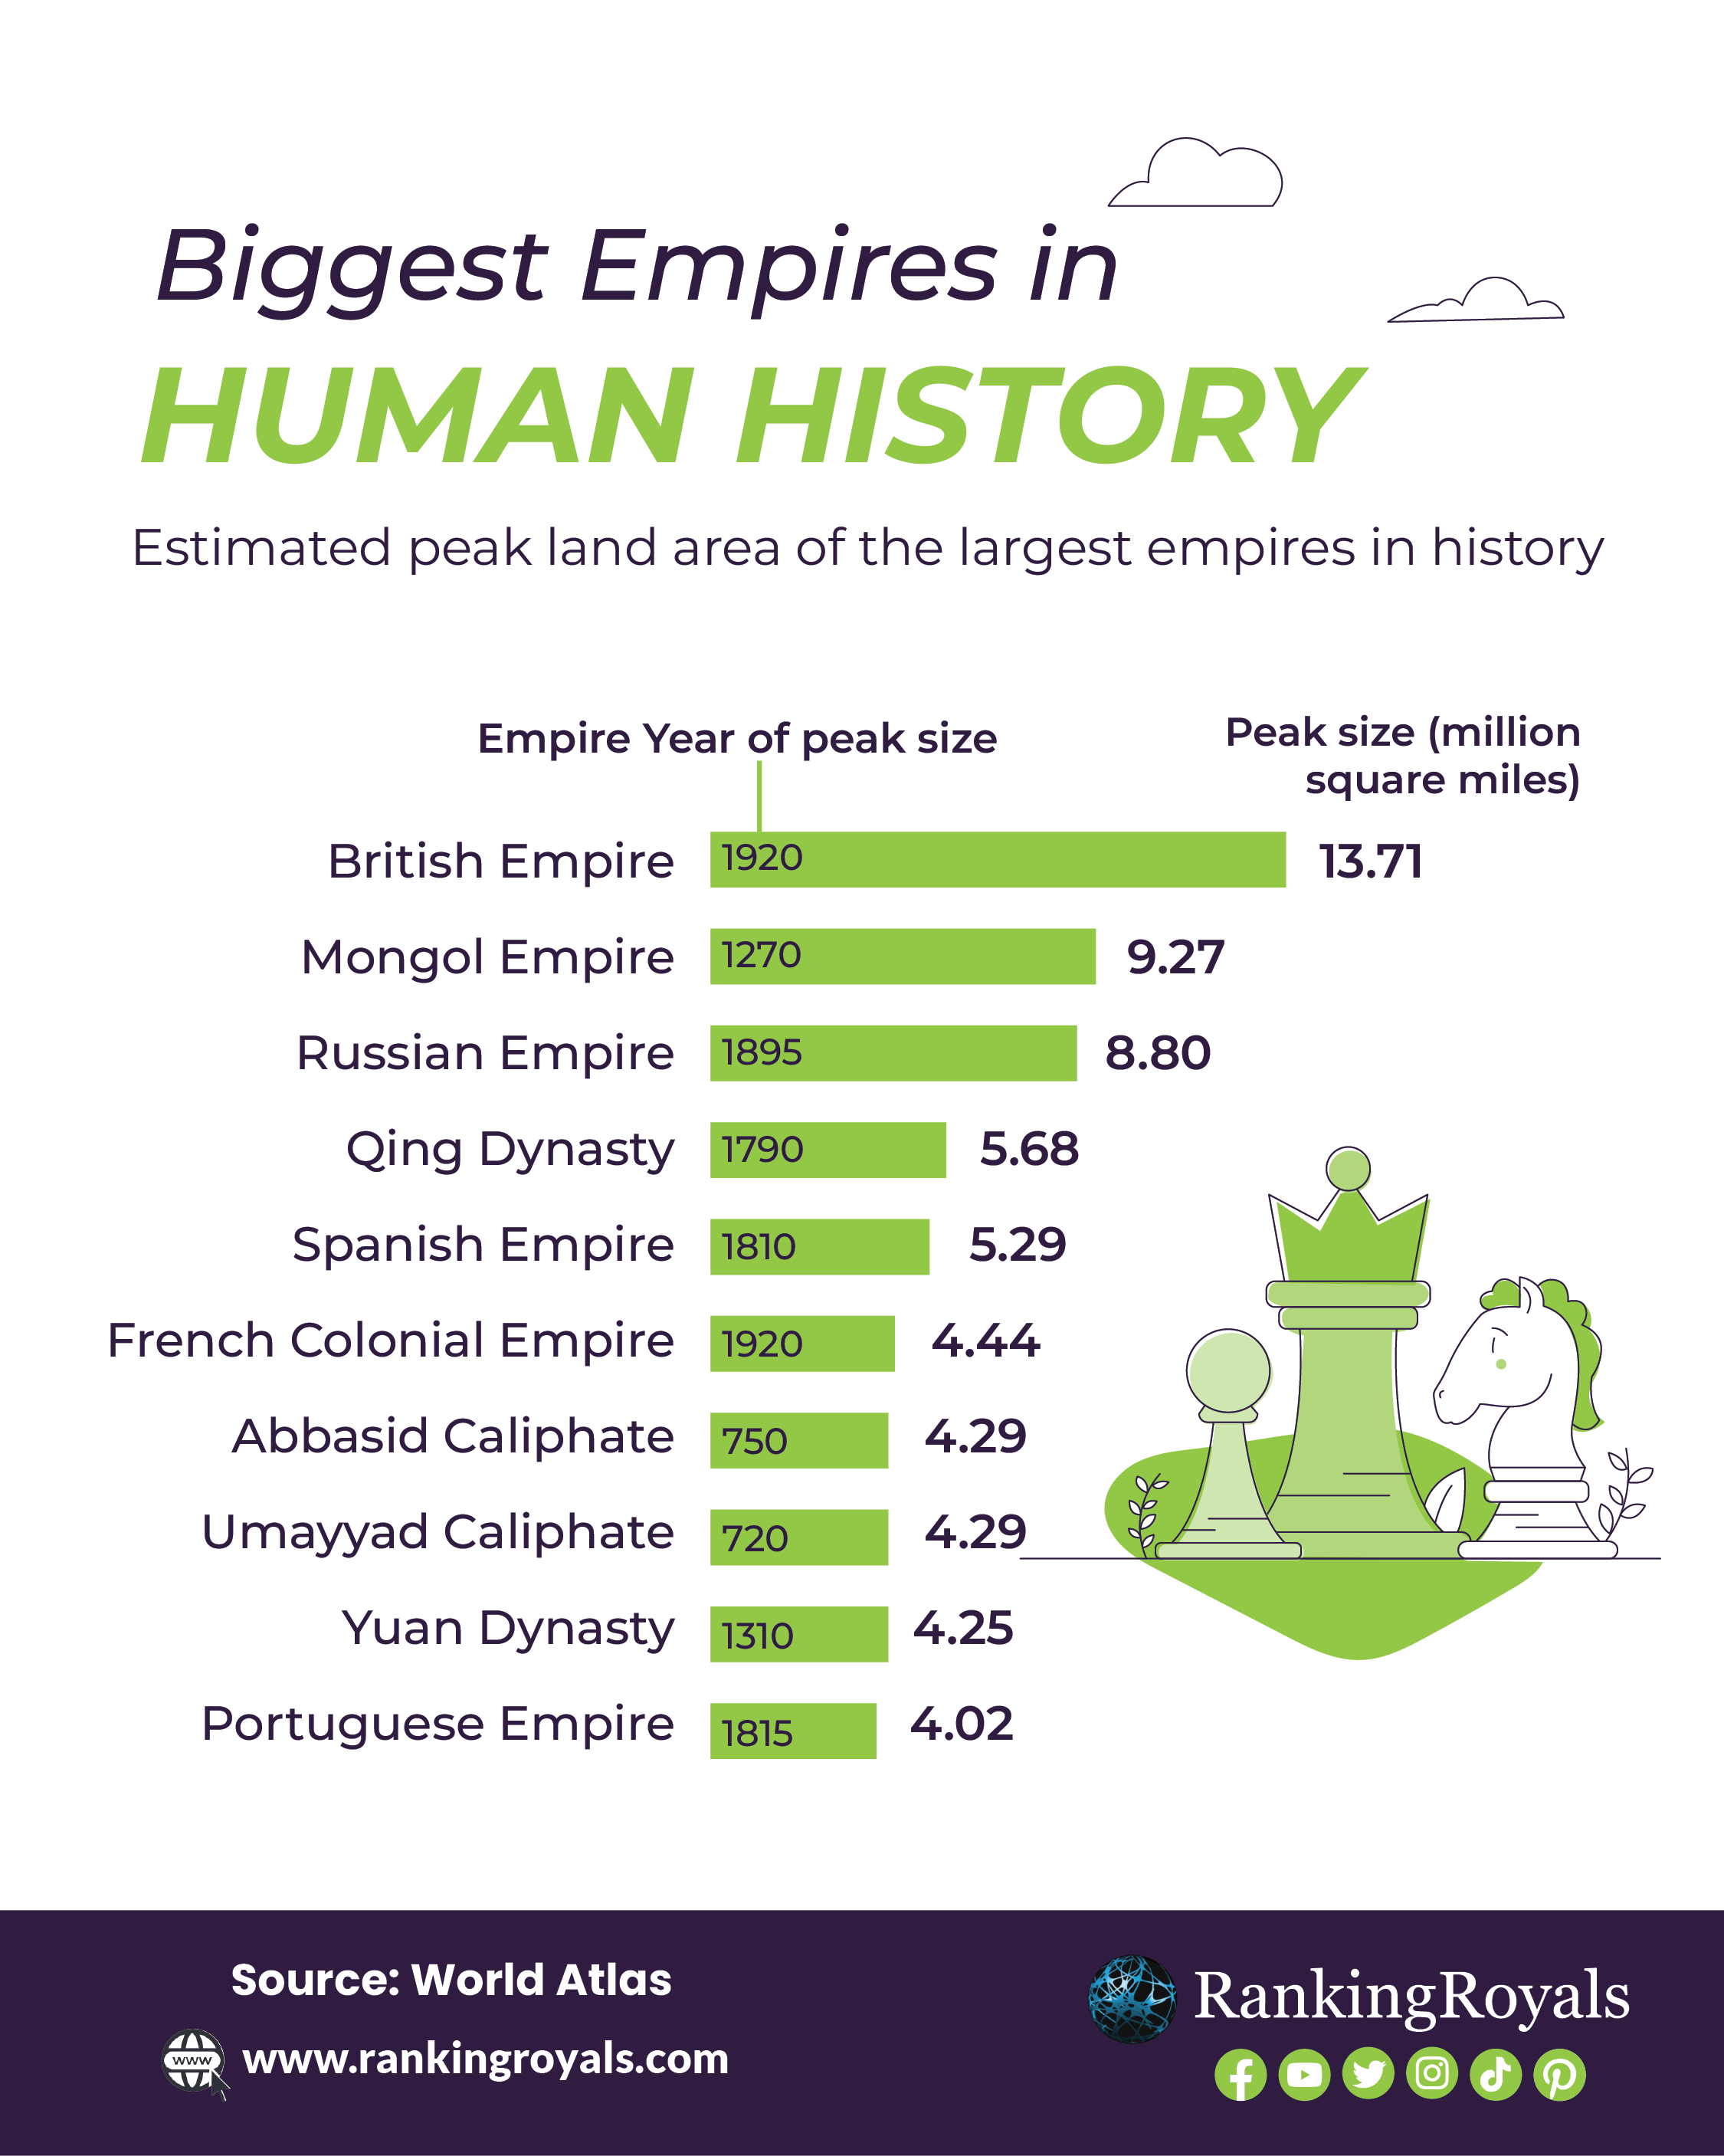 Top 5 Greatest Empires in World History 